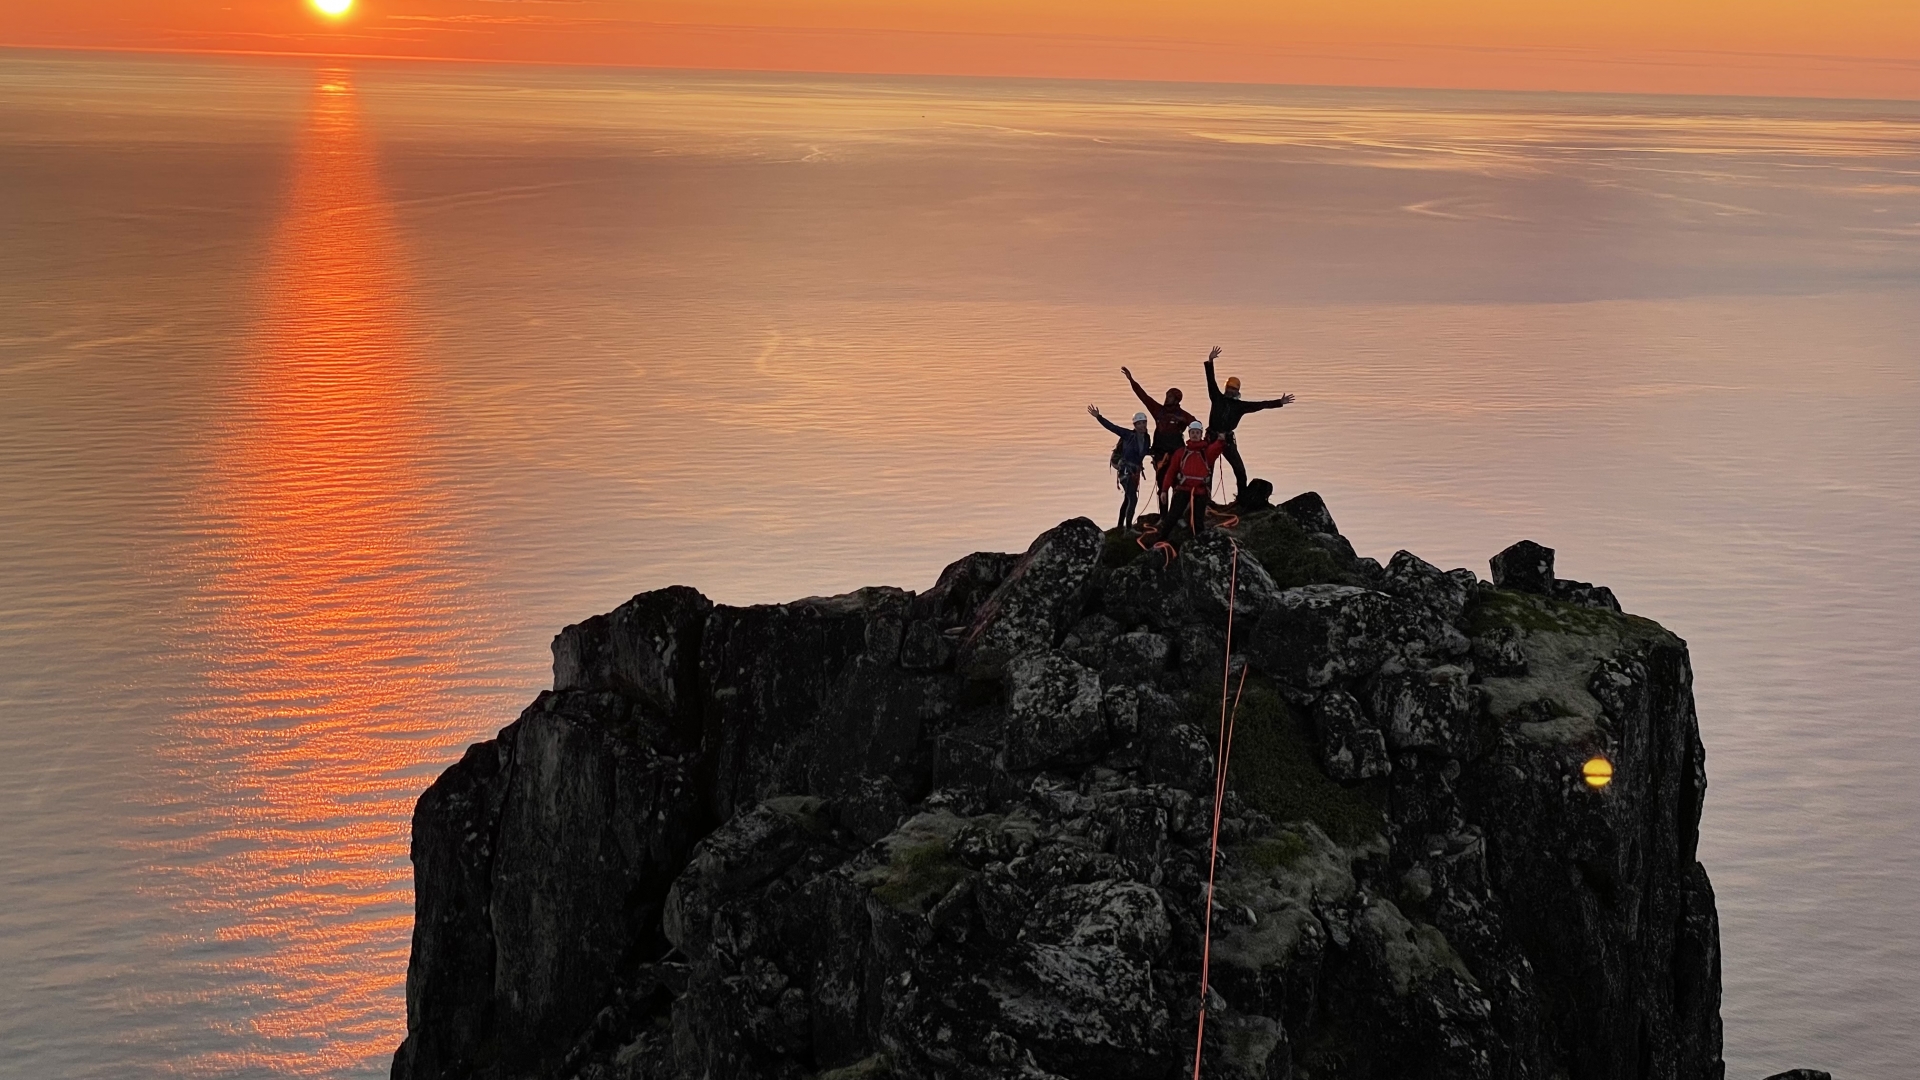 Climbers on a mountain in sunset